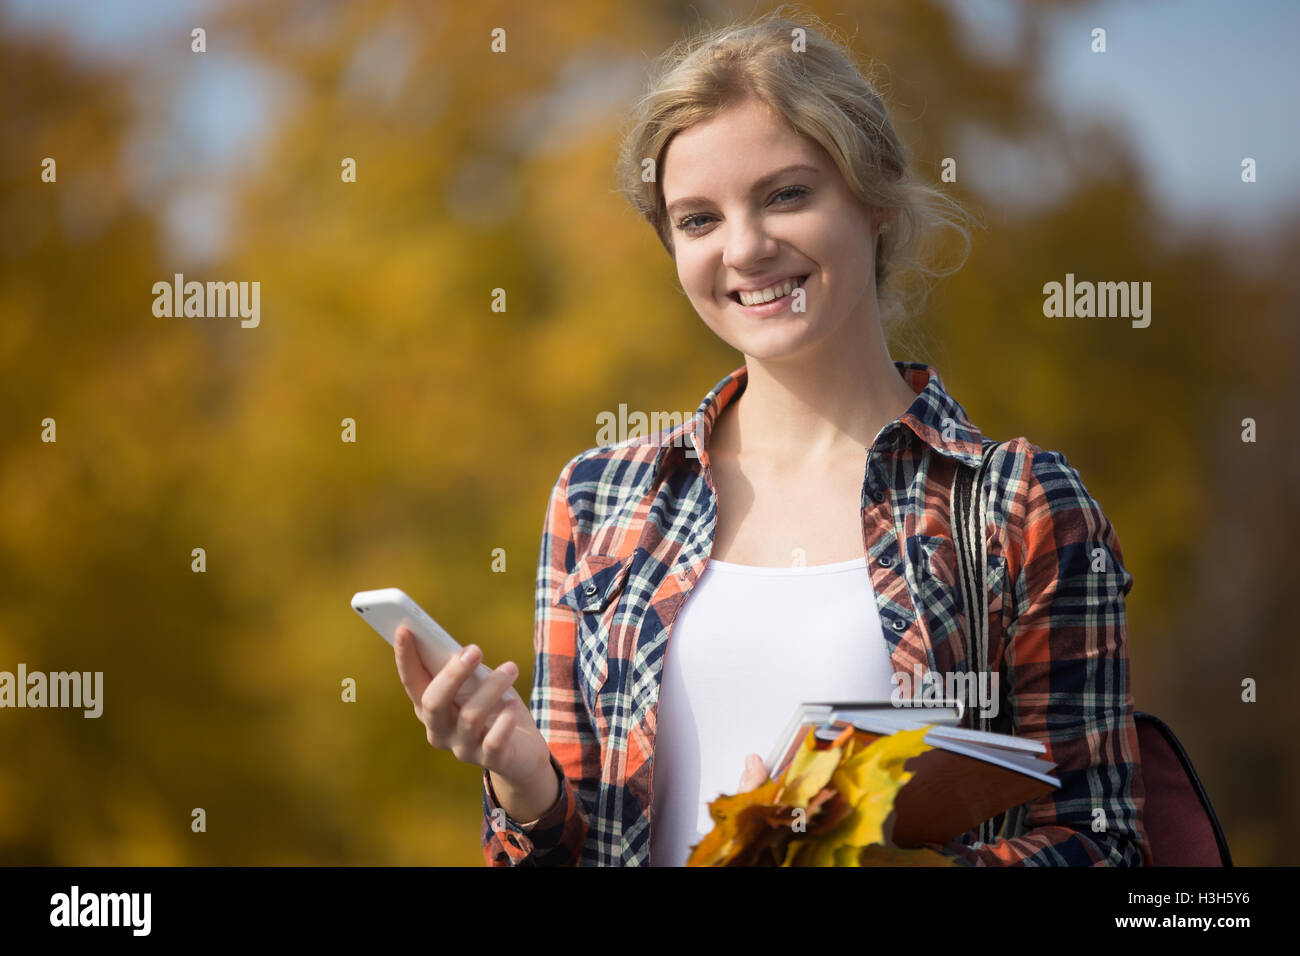 Portrait of student outsides, holding mobile phone in one hand Stock Photo